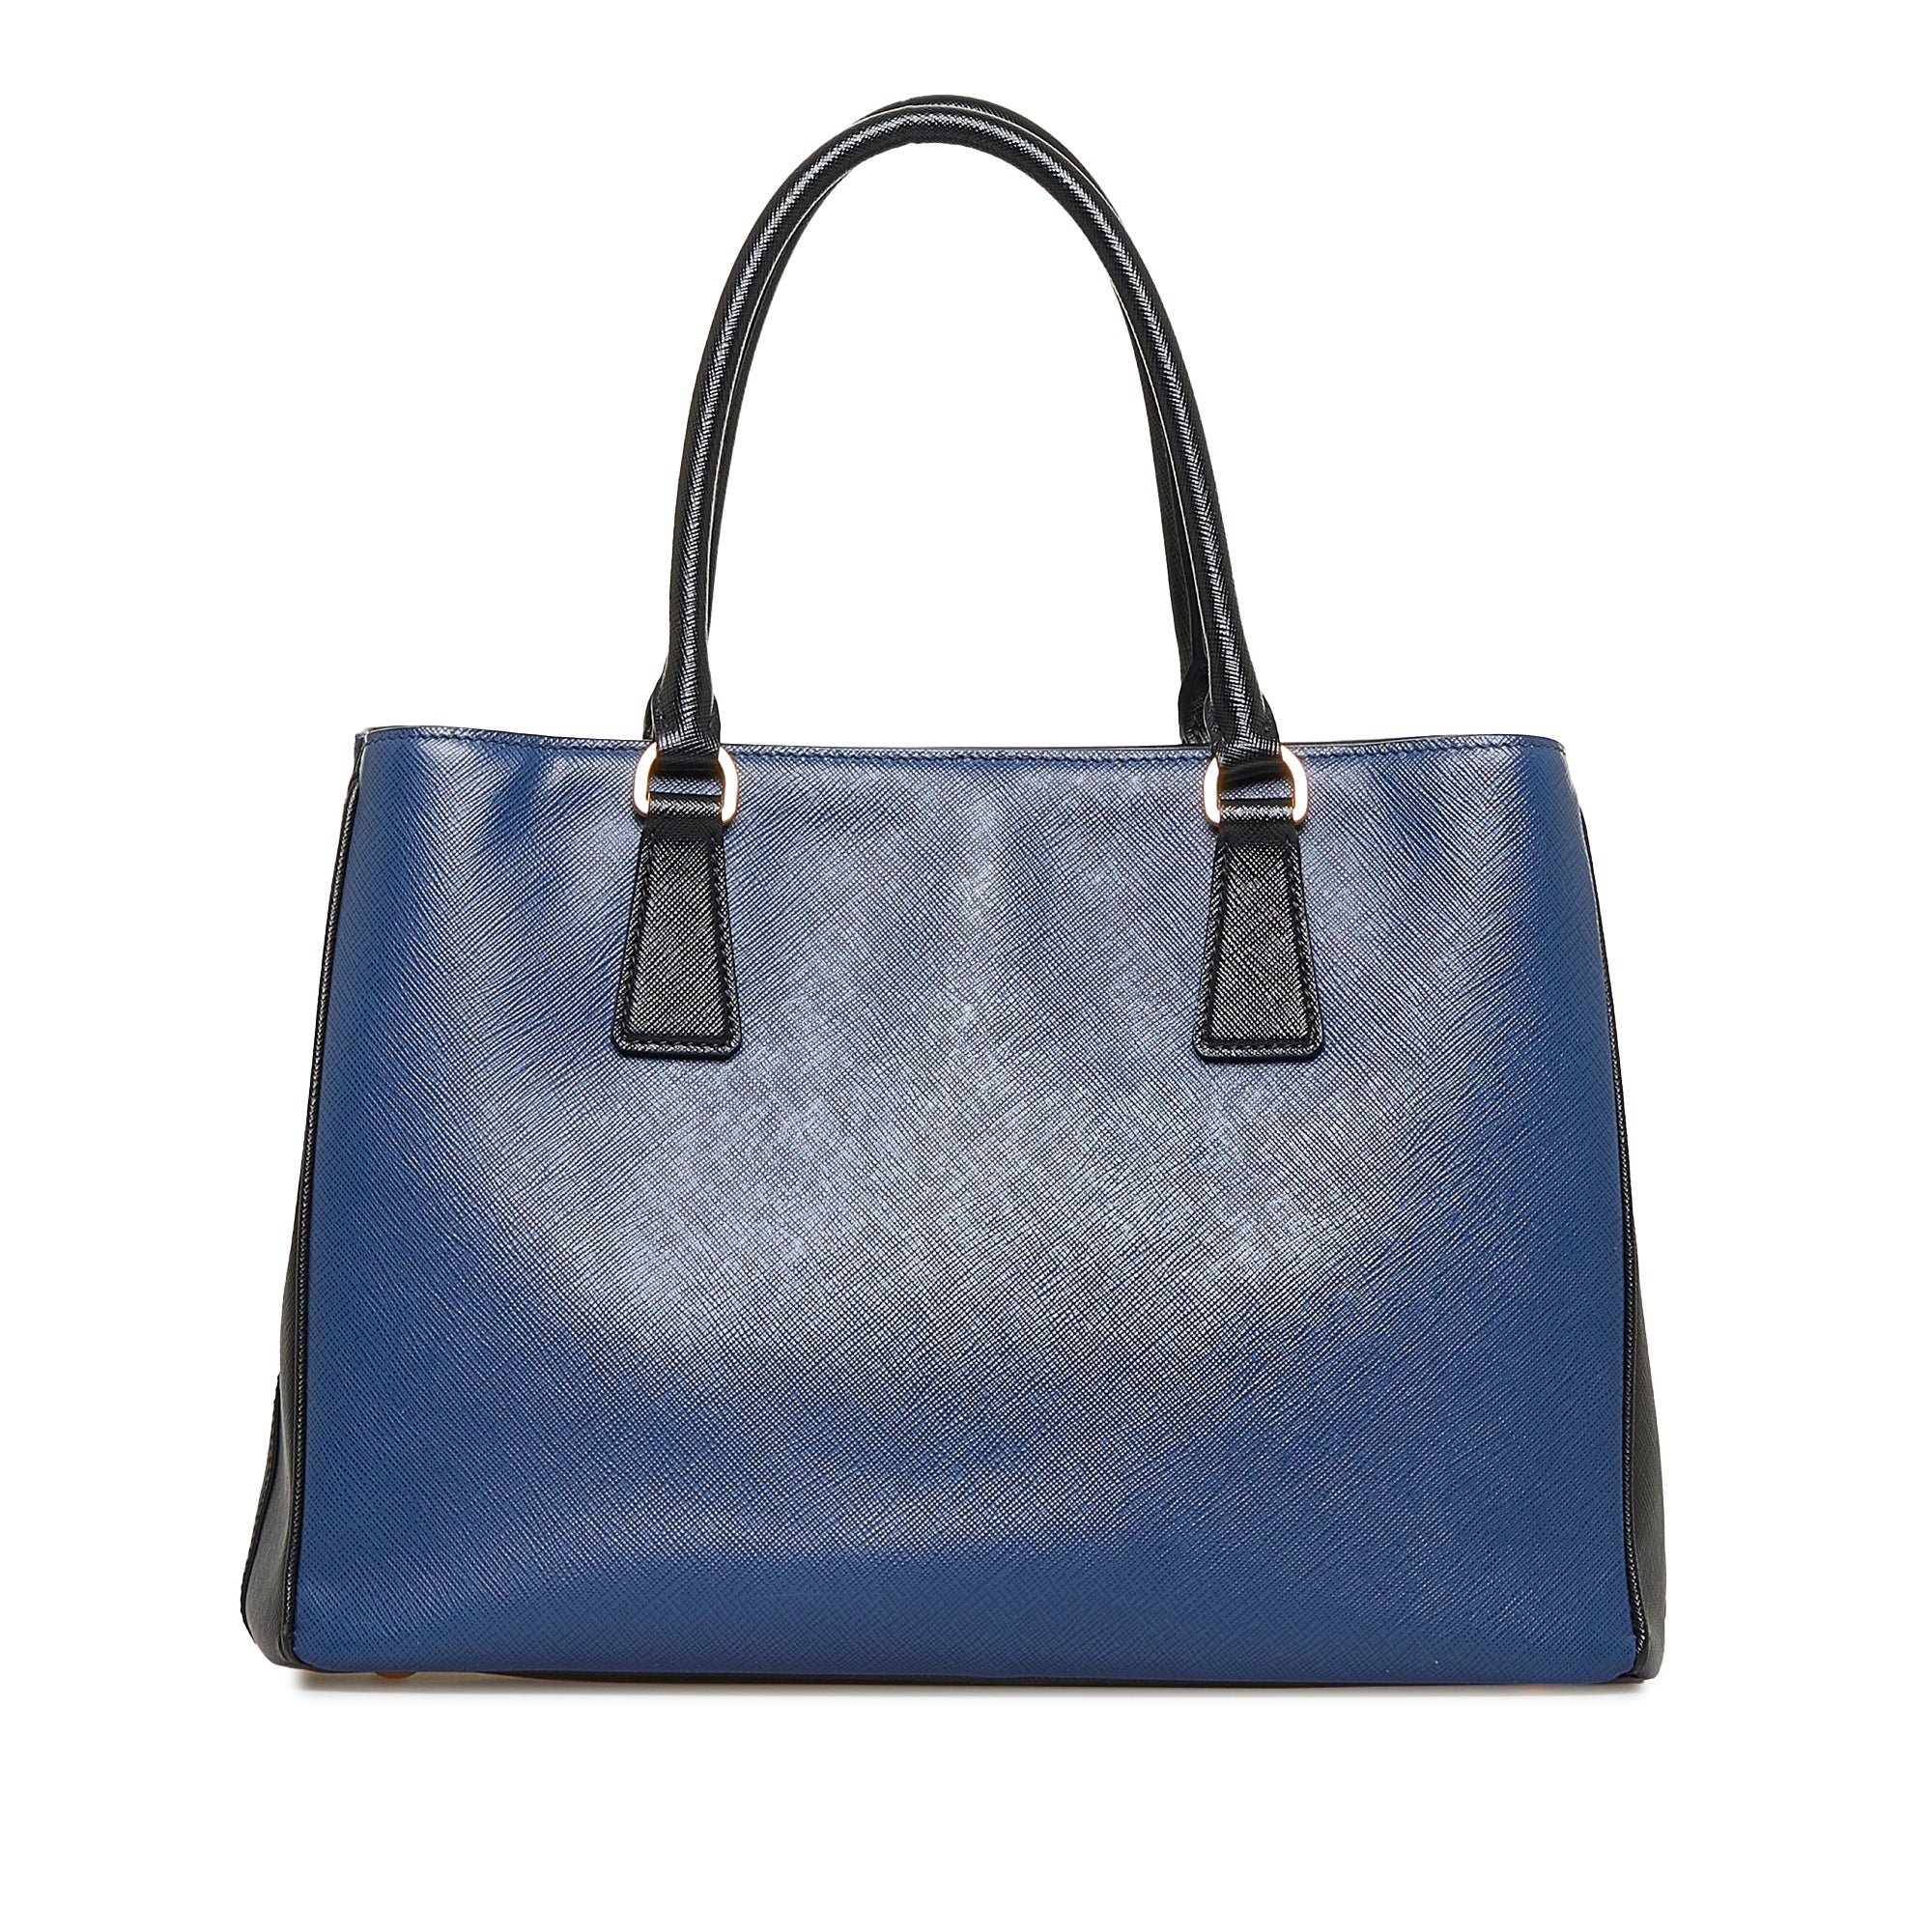 PRADA Saffiano Lux Leather Mini Double Zip Tote Bag Navy Blue for